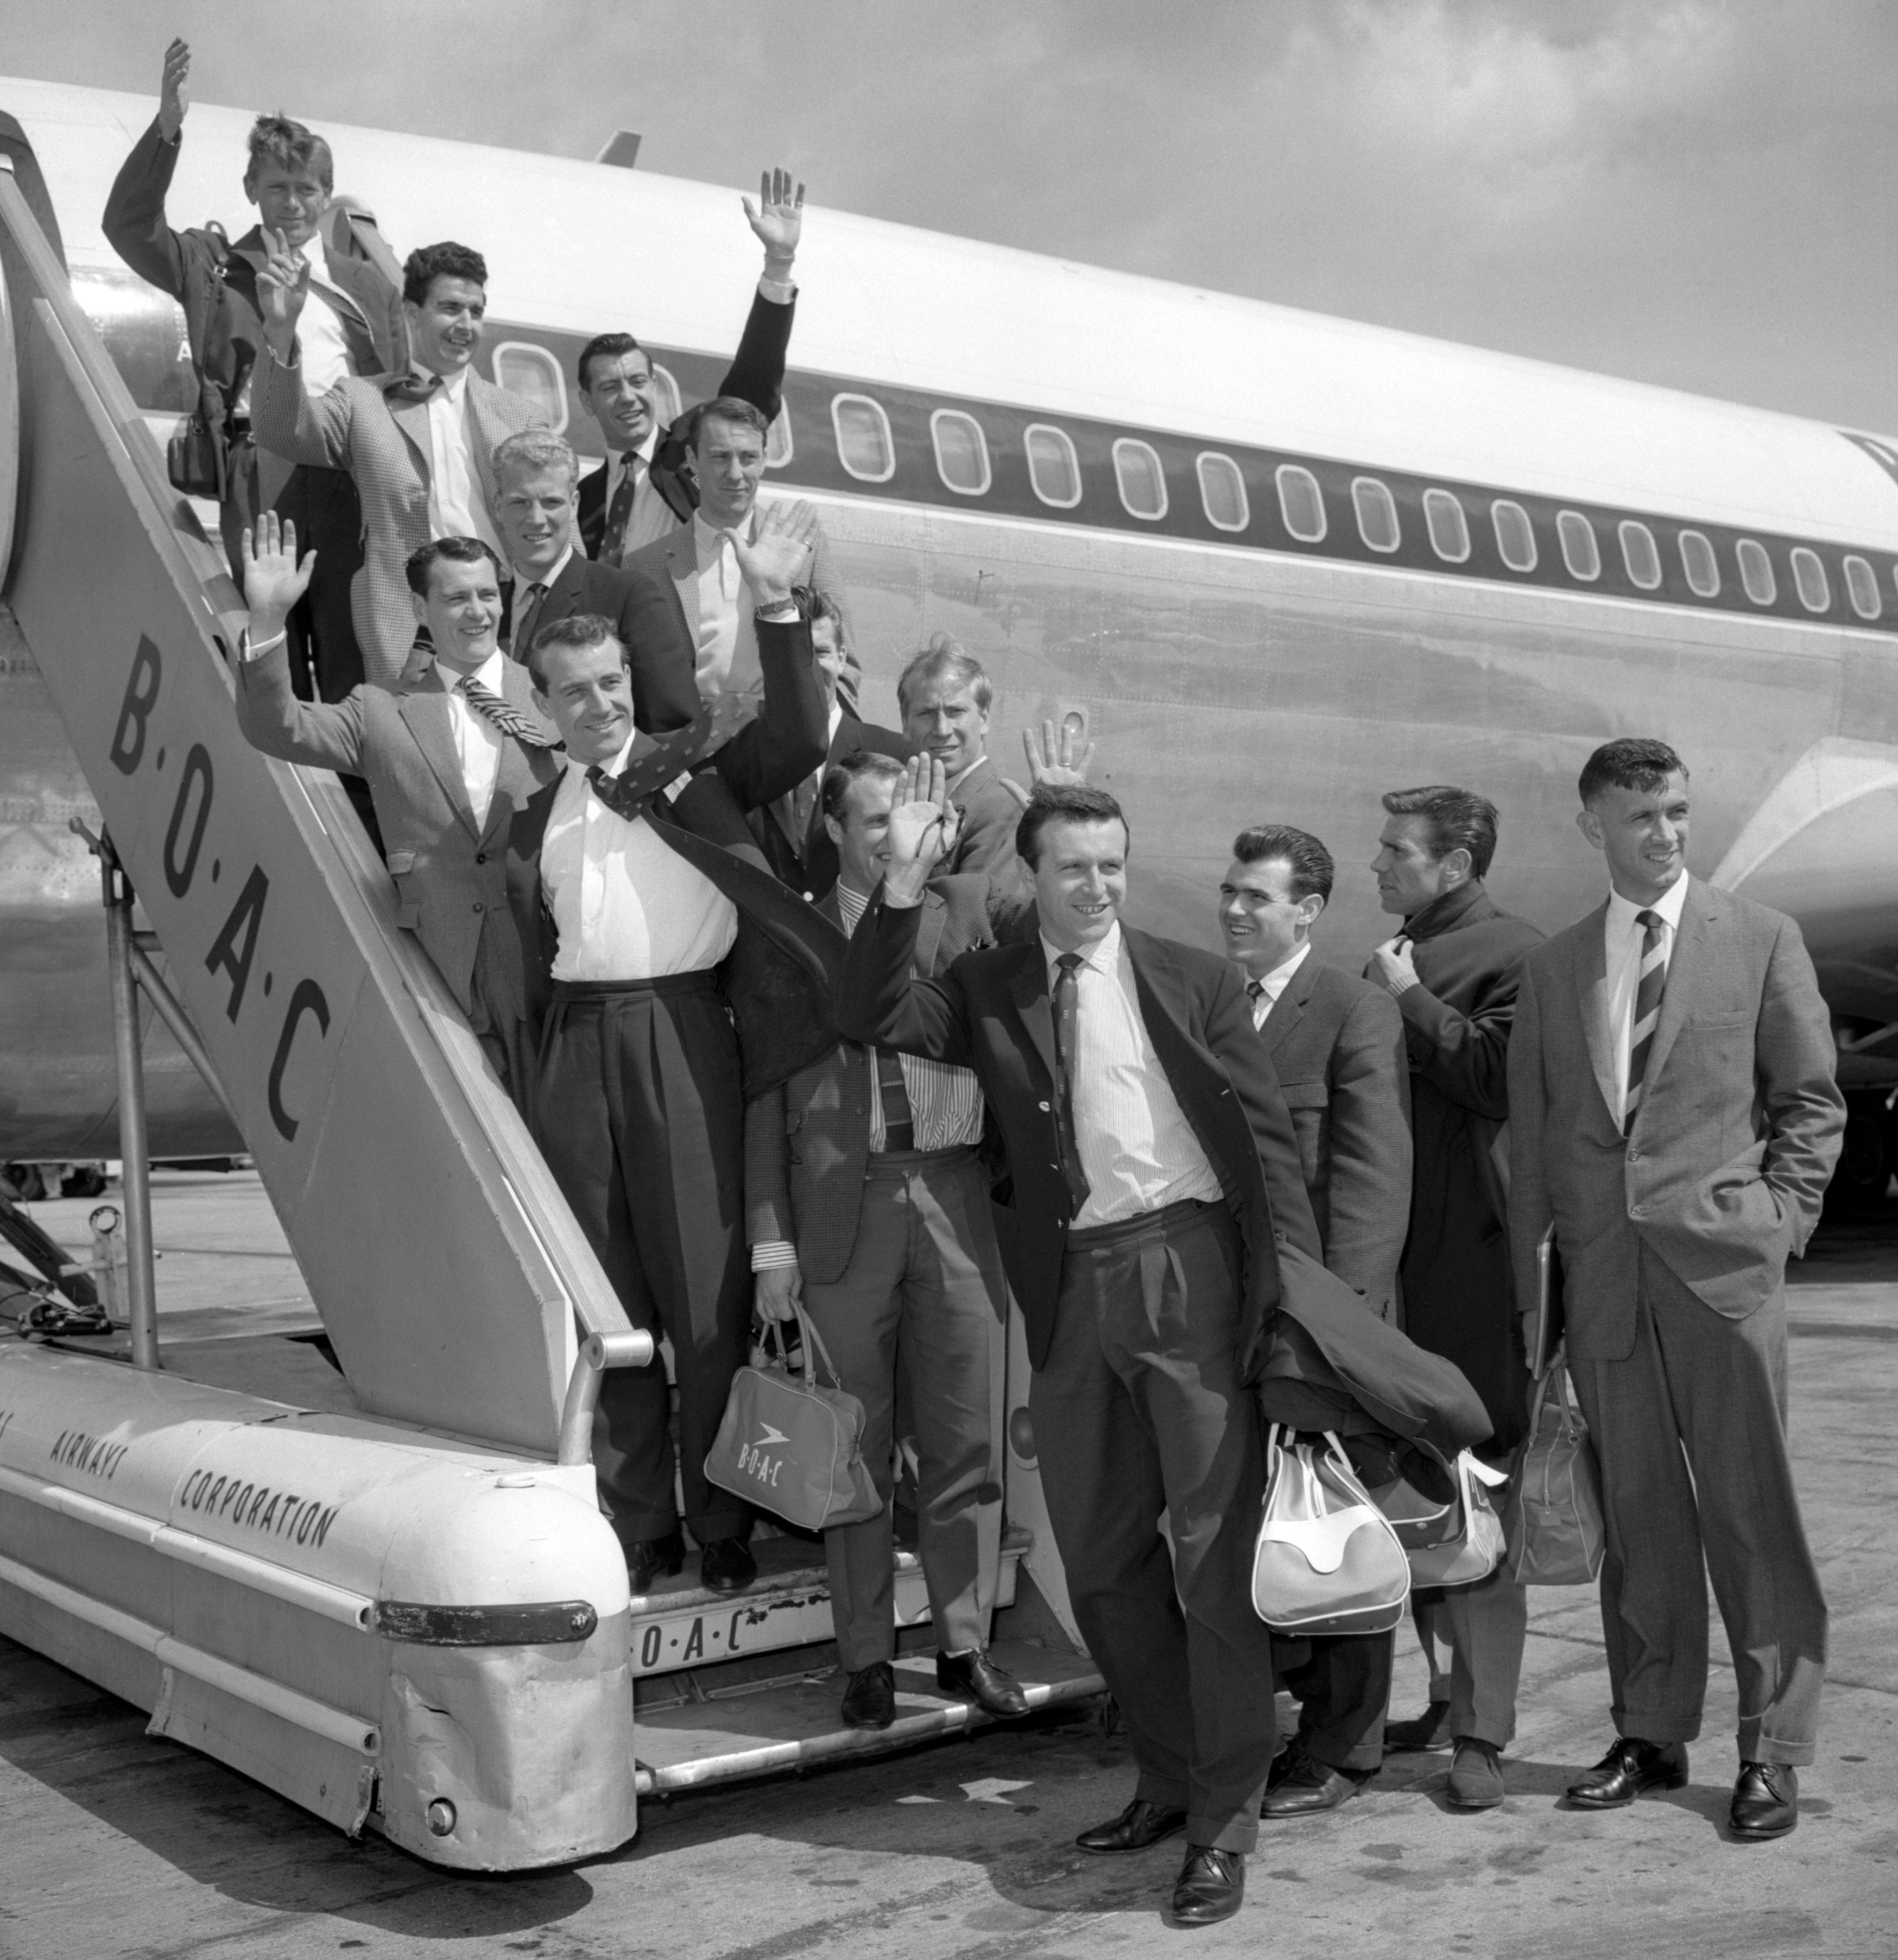 England’s World Cup squad get set to fly to Chile in 1962 (PA)